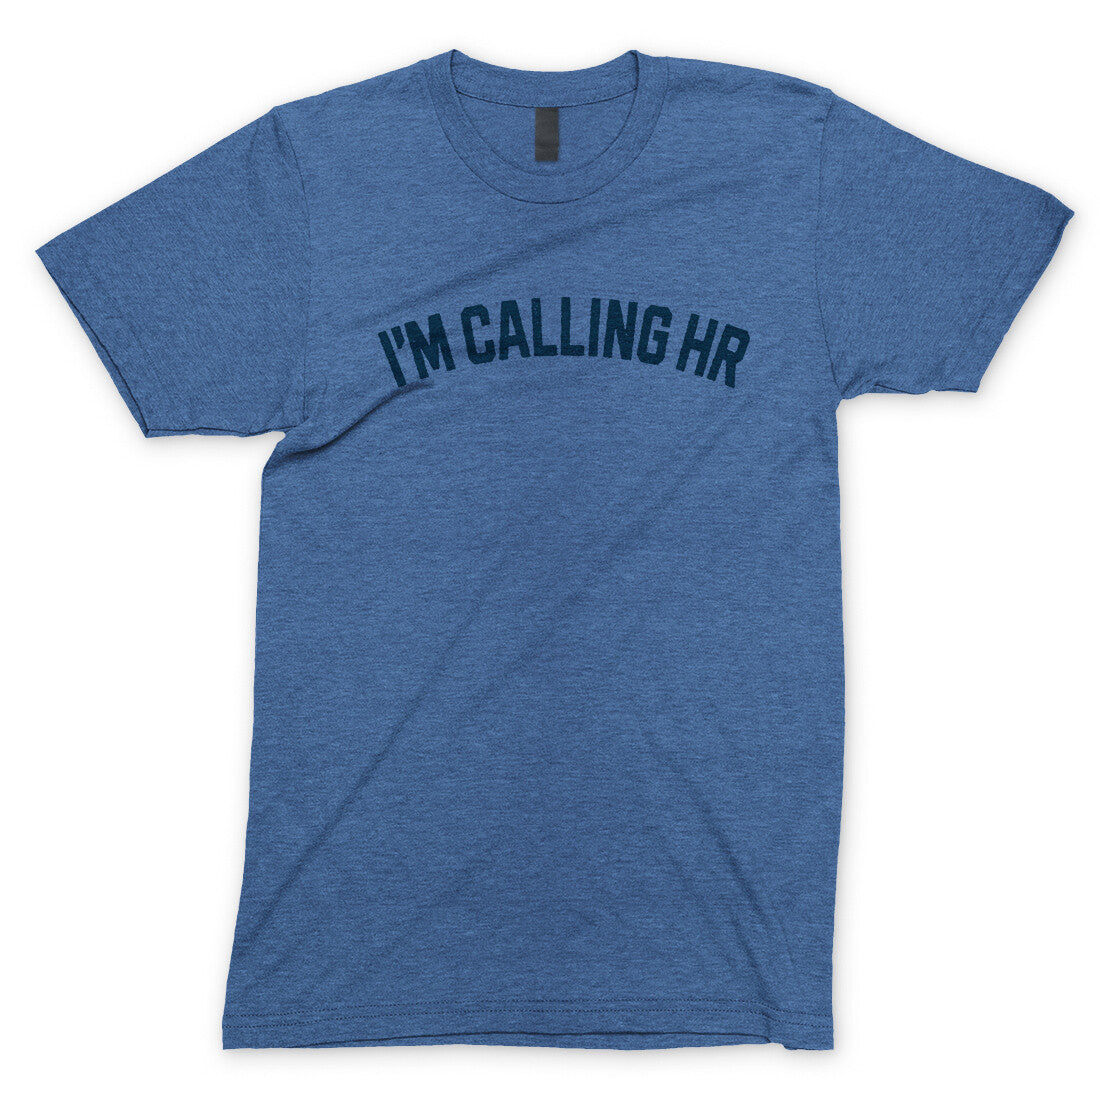 I'm Calling HR in Heather Royal Color